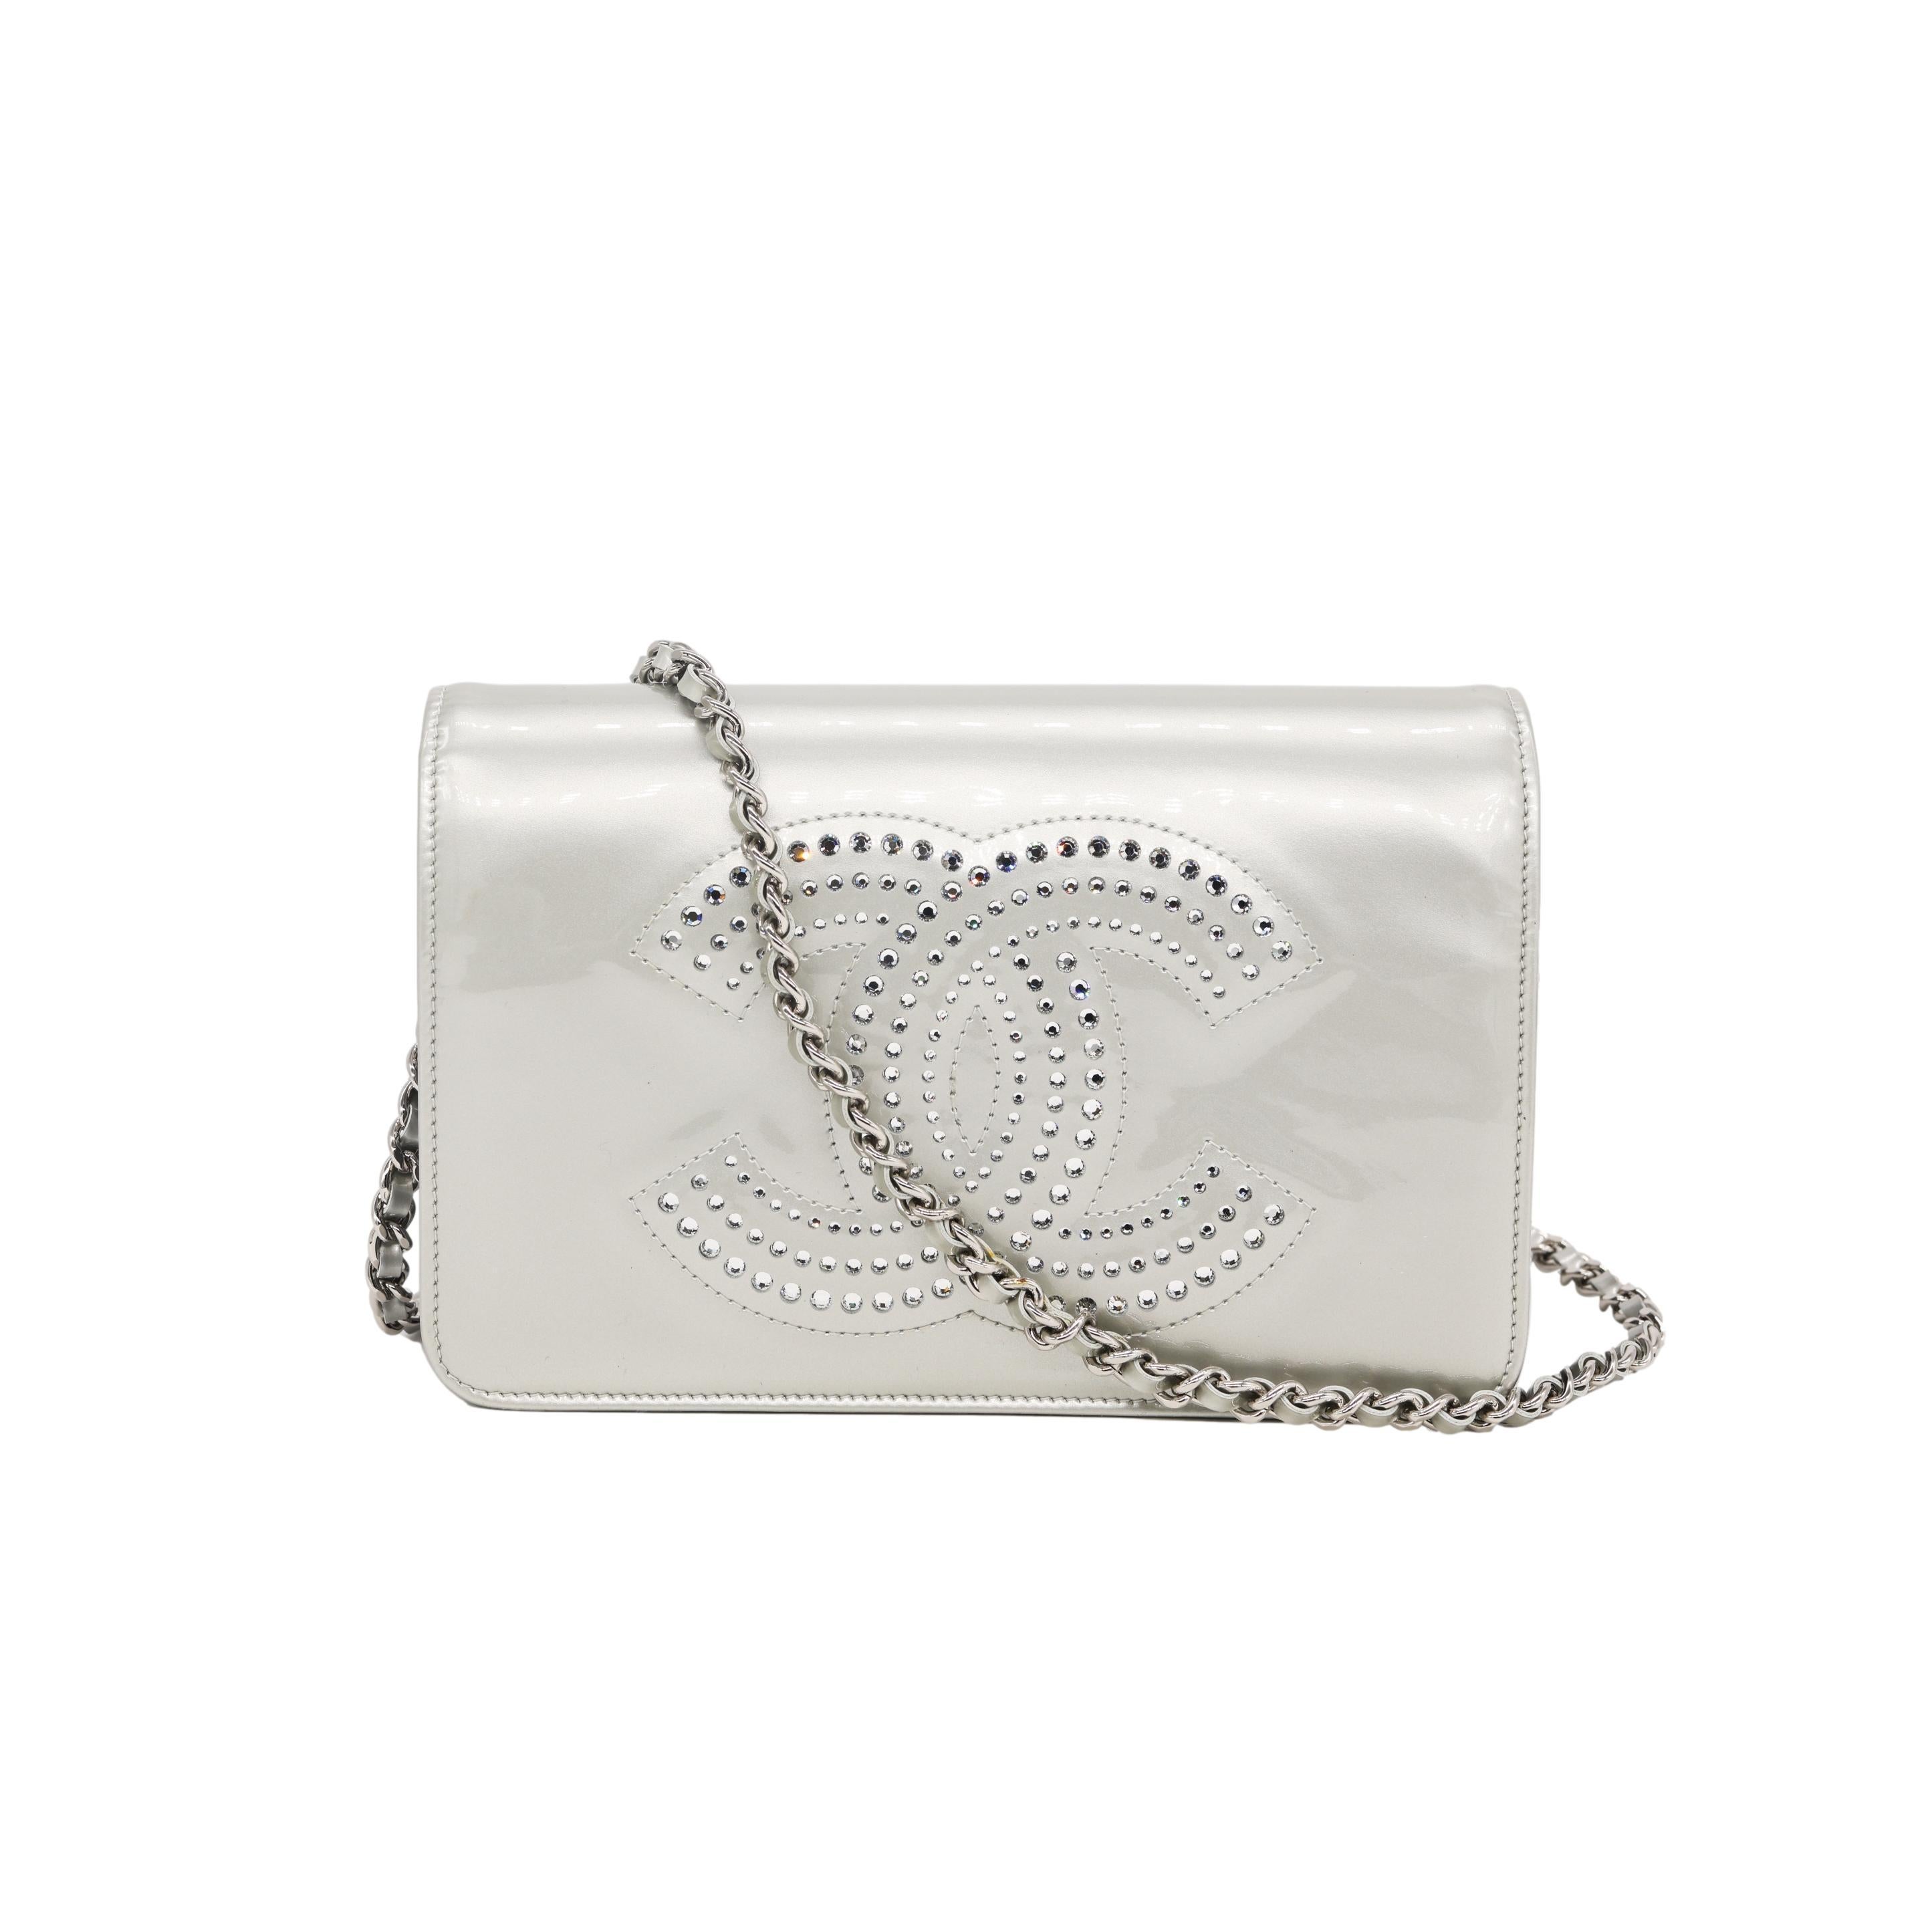 Chanel Silver Patent Leather Strass Wallet on Chain Clutch Crossbody Bag, 2009. 10